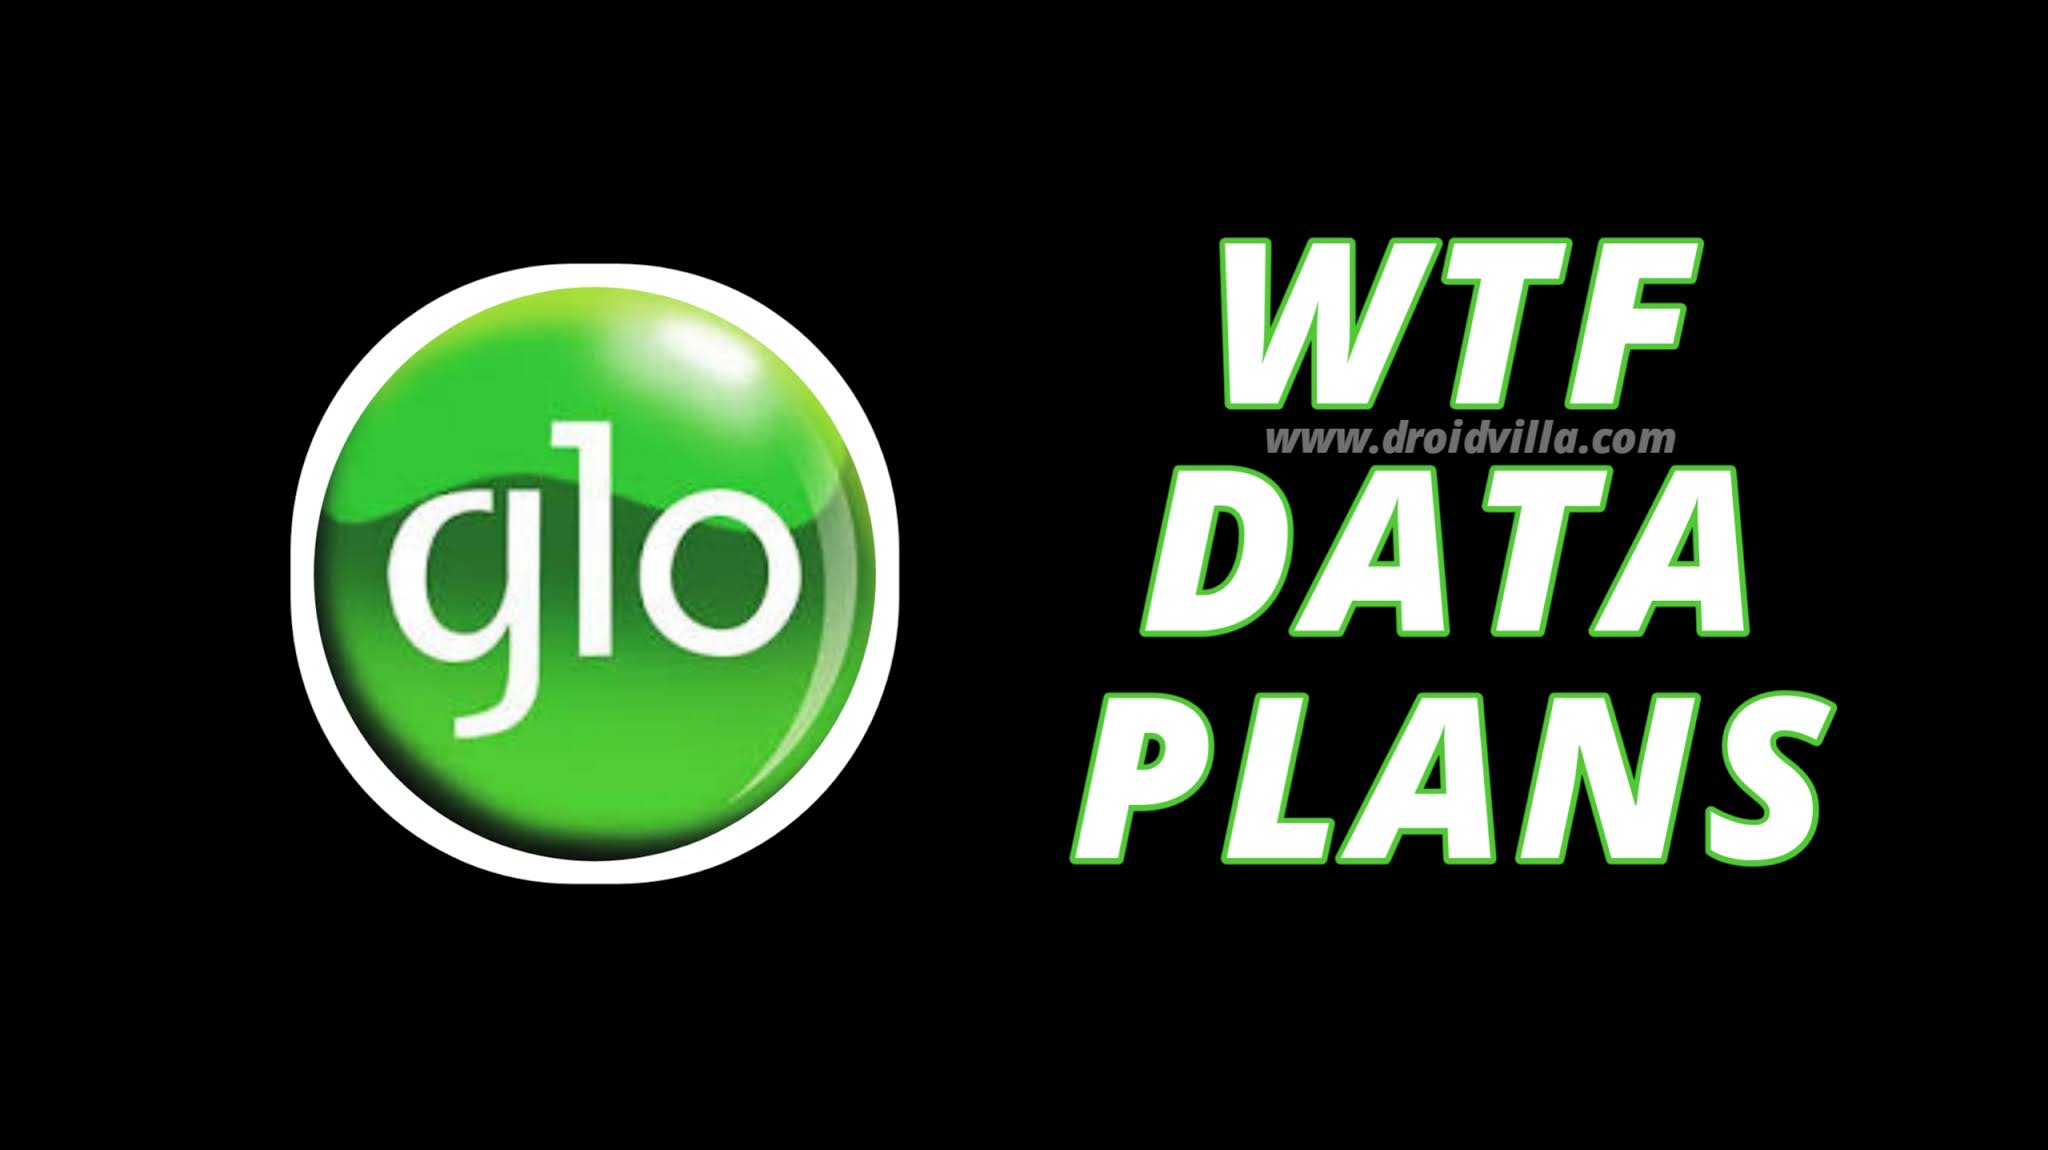 glo-nigeria-introduces-wtf-social-bundle-data-plan-glo-500mb-for-n100-and-more-droidvilla-tech